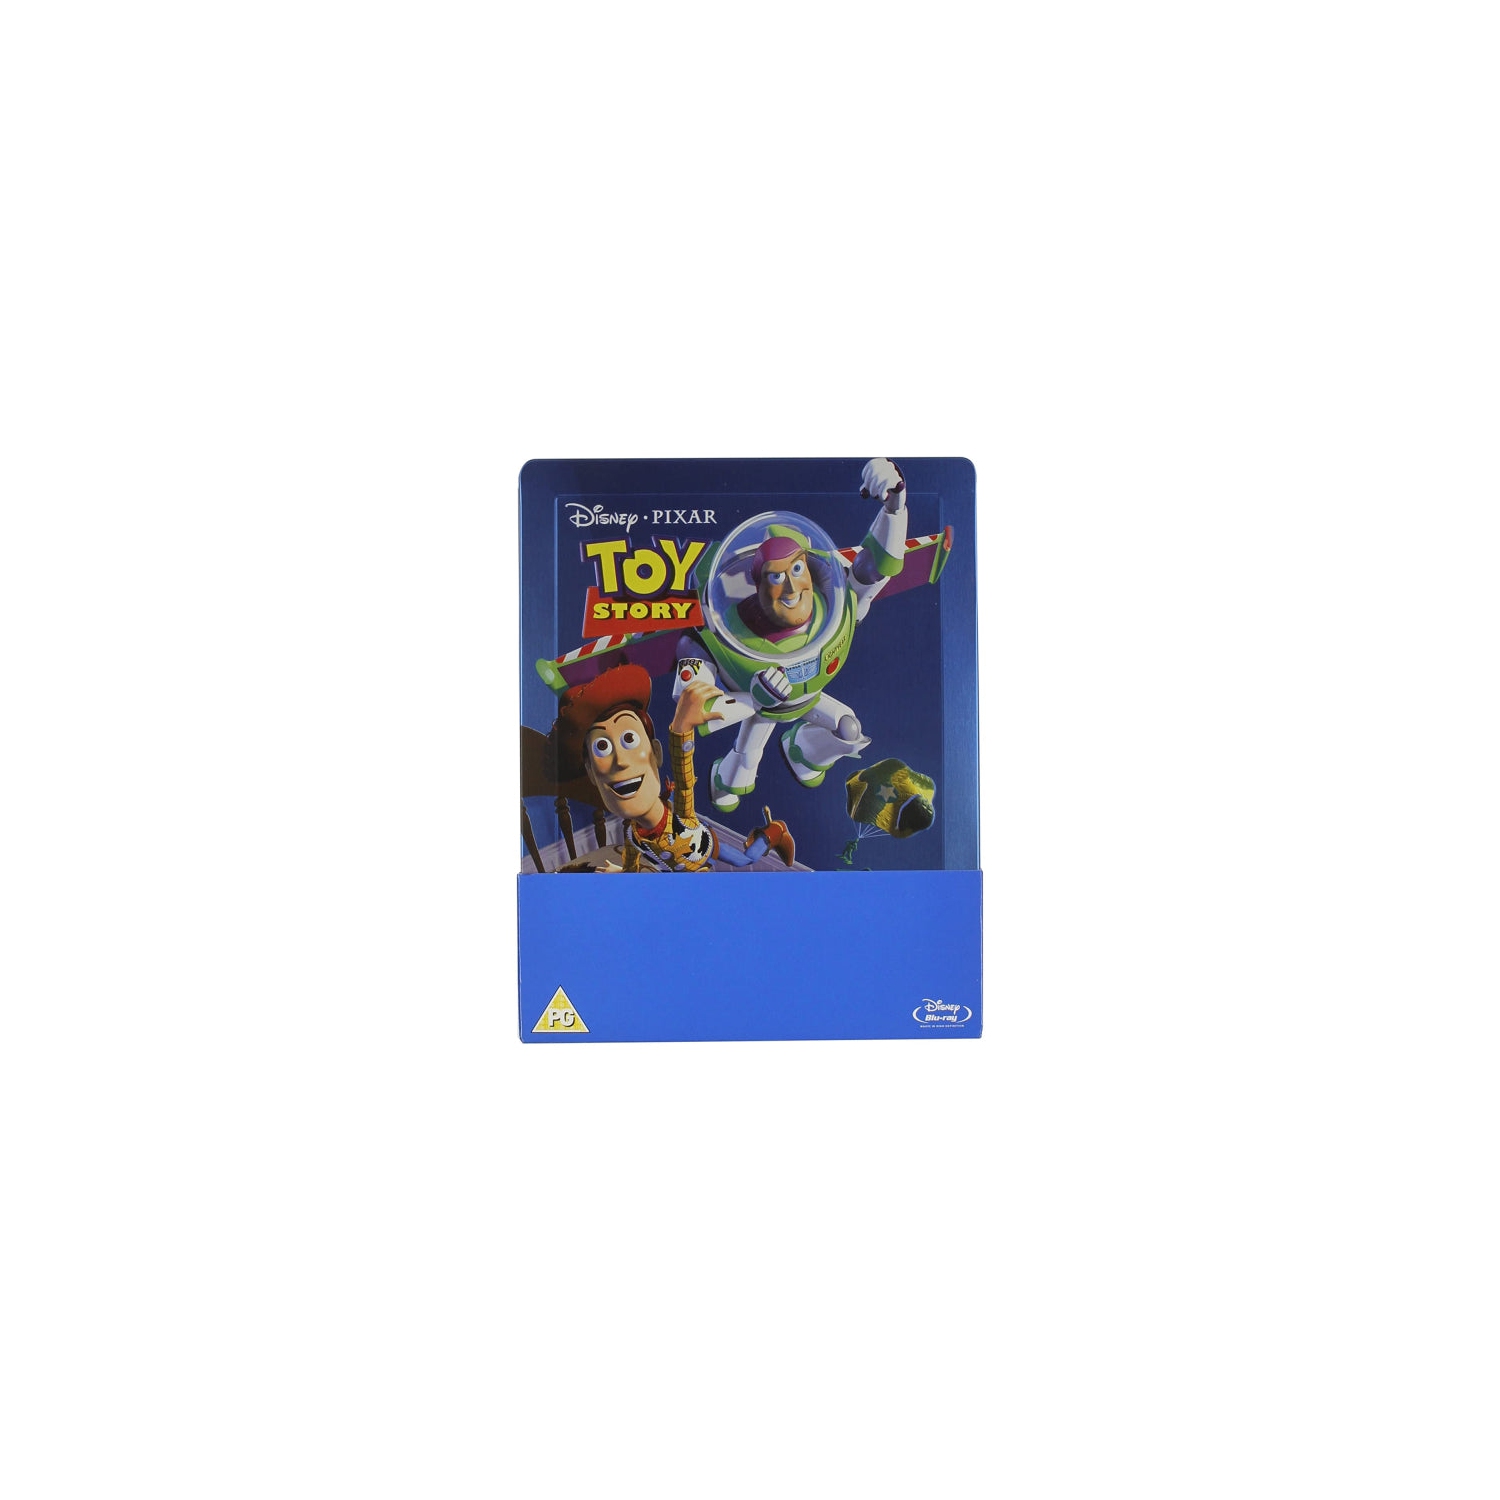 Disney Pixar Toy Story - Limited Edition Collectible SteelBook [Blu-Ray]